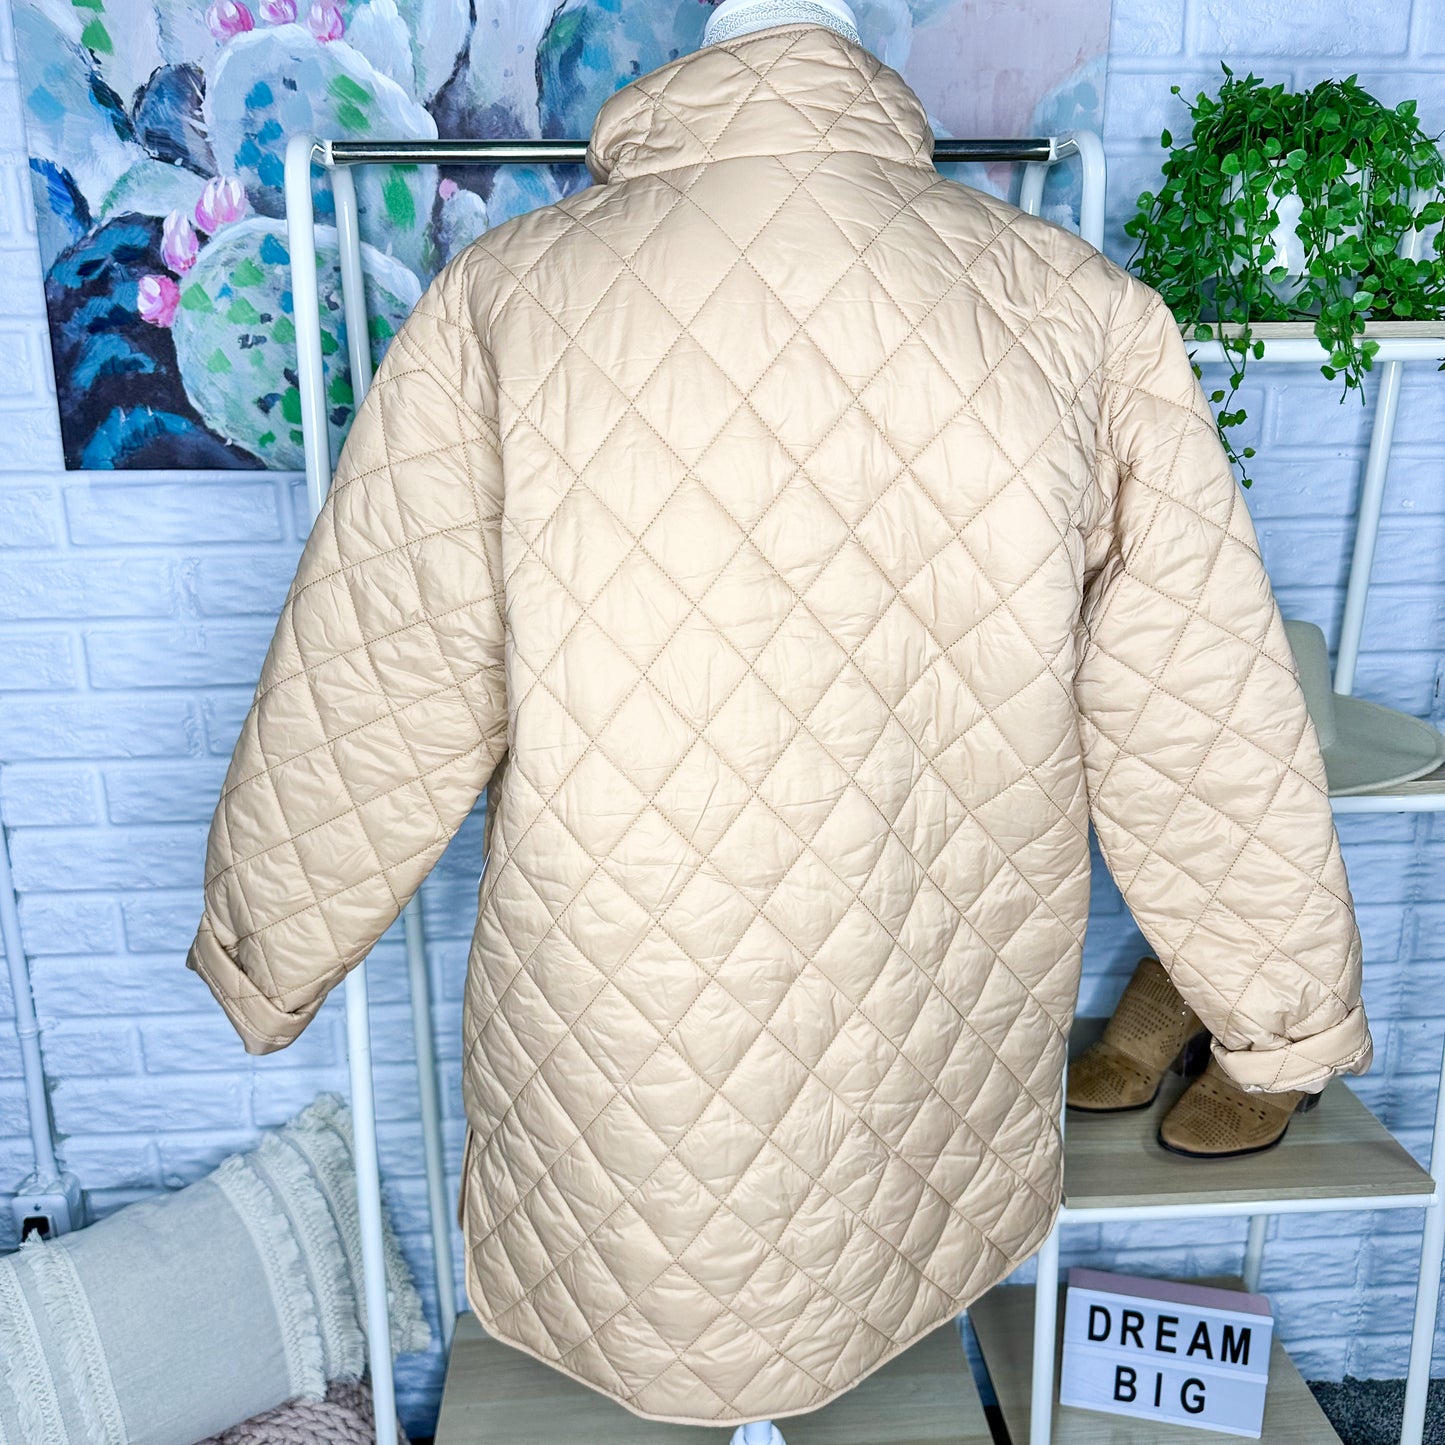 Time & Tru New Tan Quilted Barn Coat Size Small